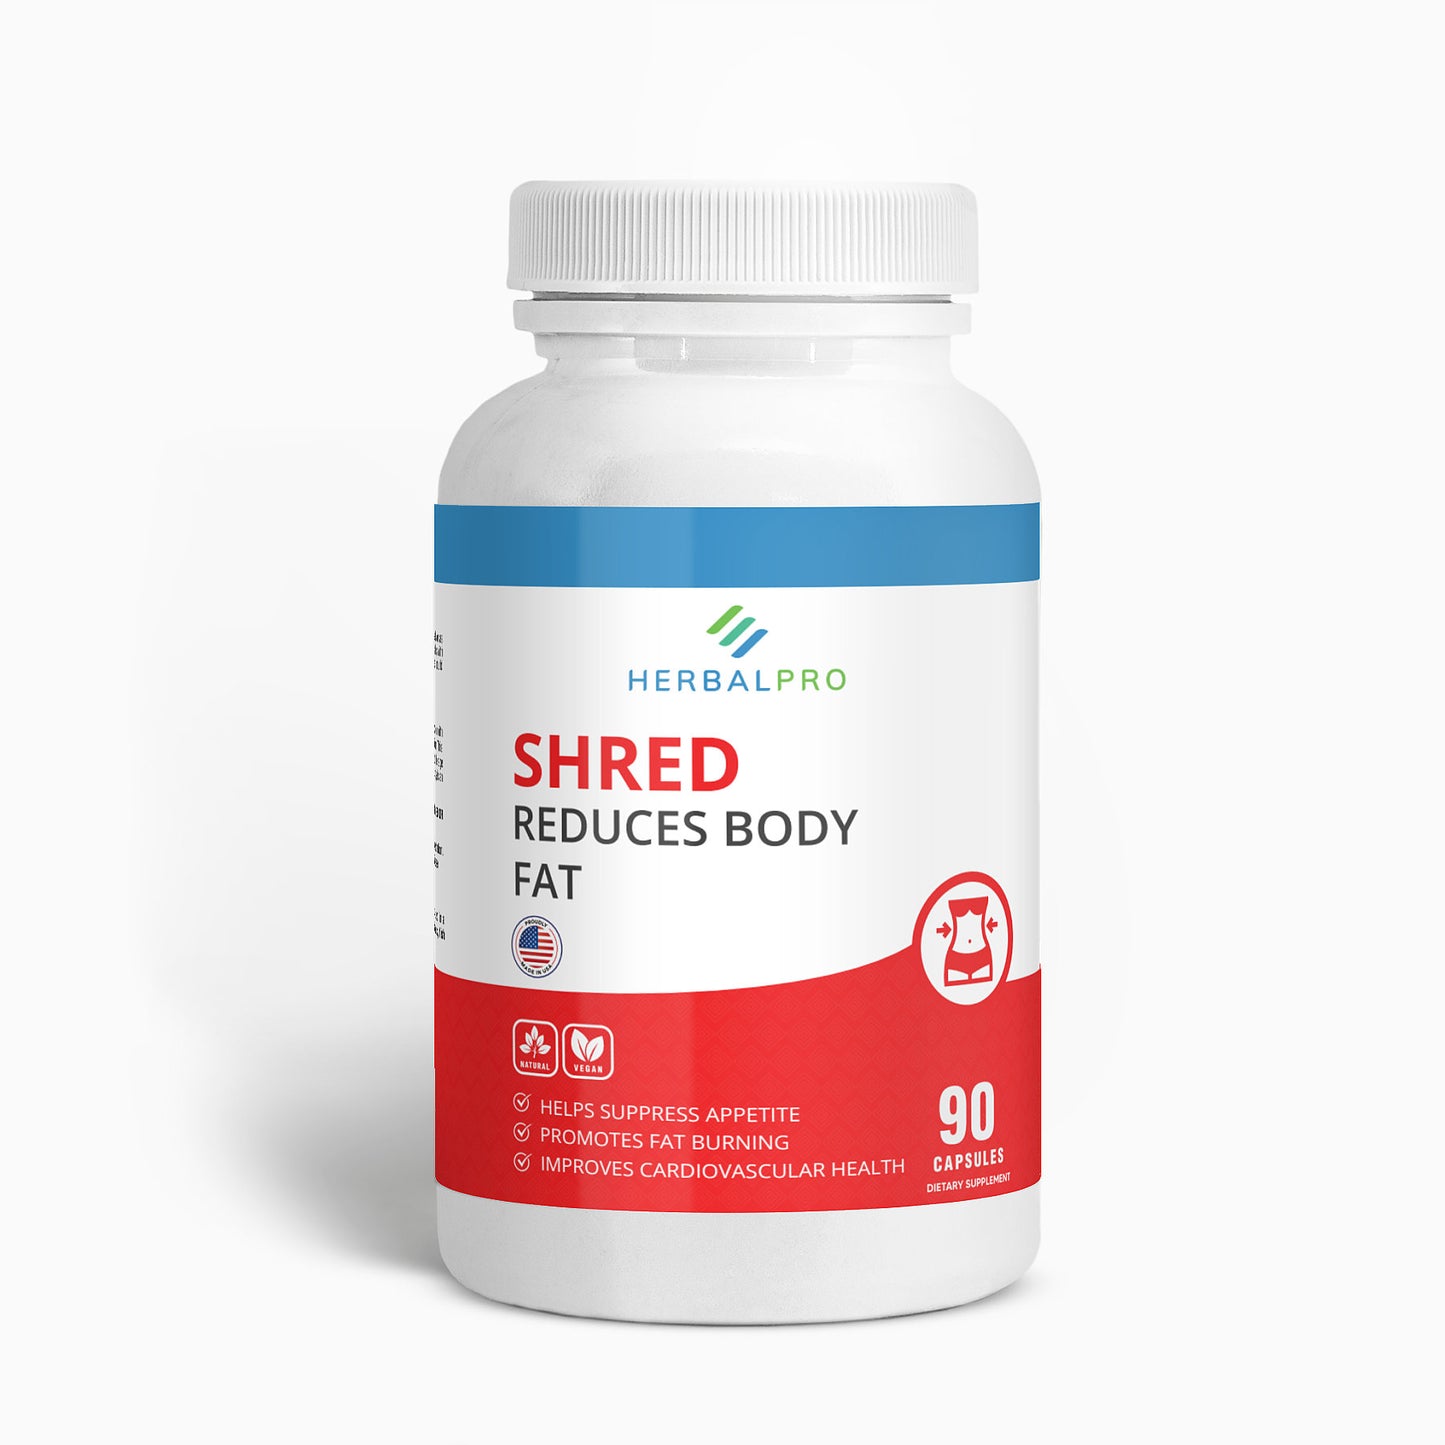 Shred (Reduces Body Fat)